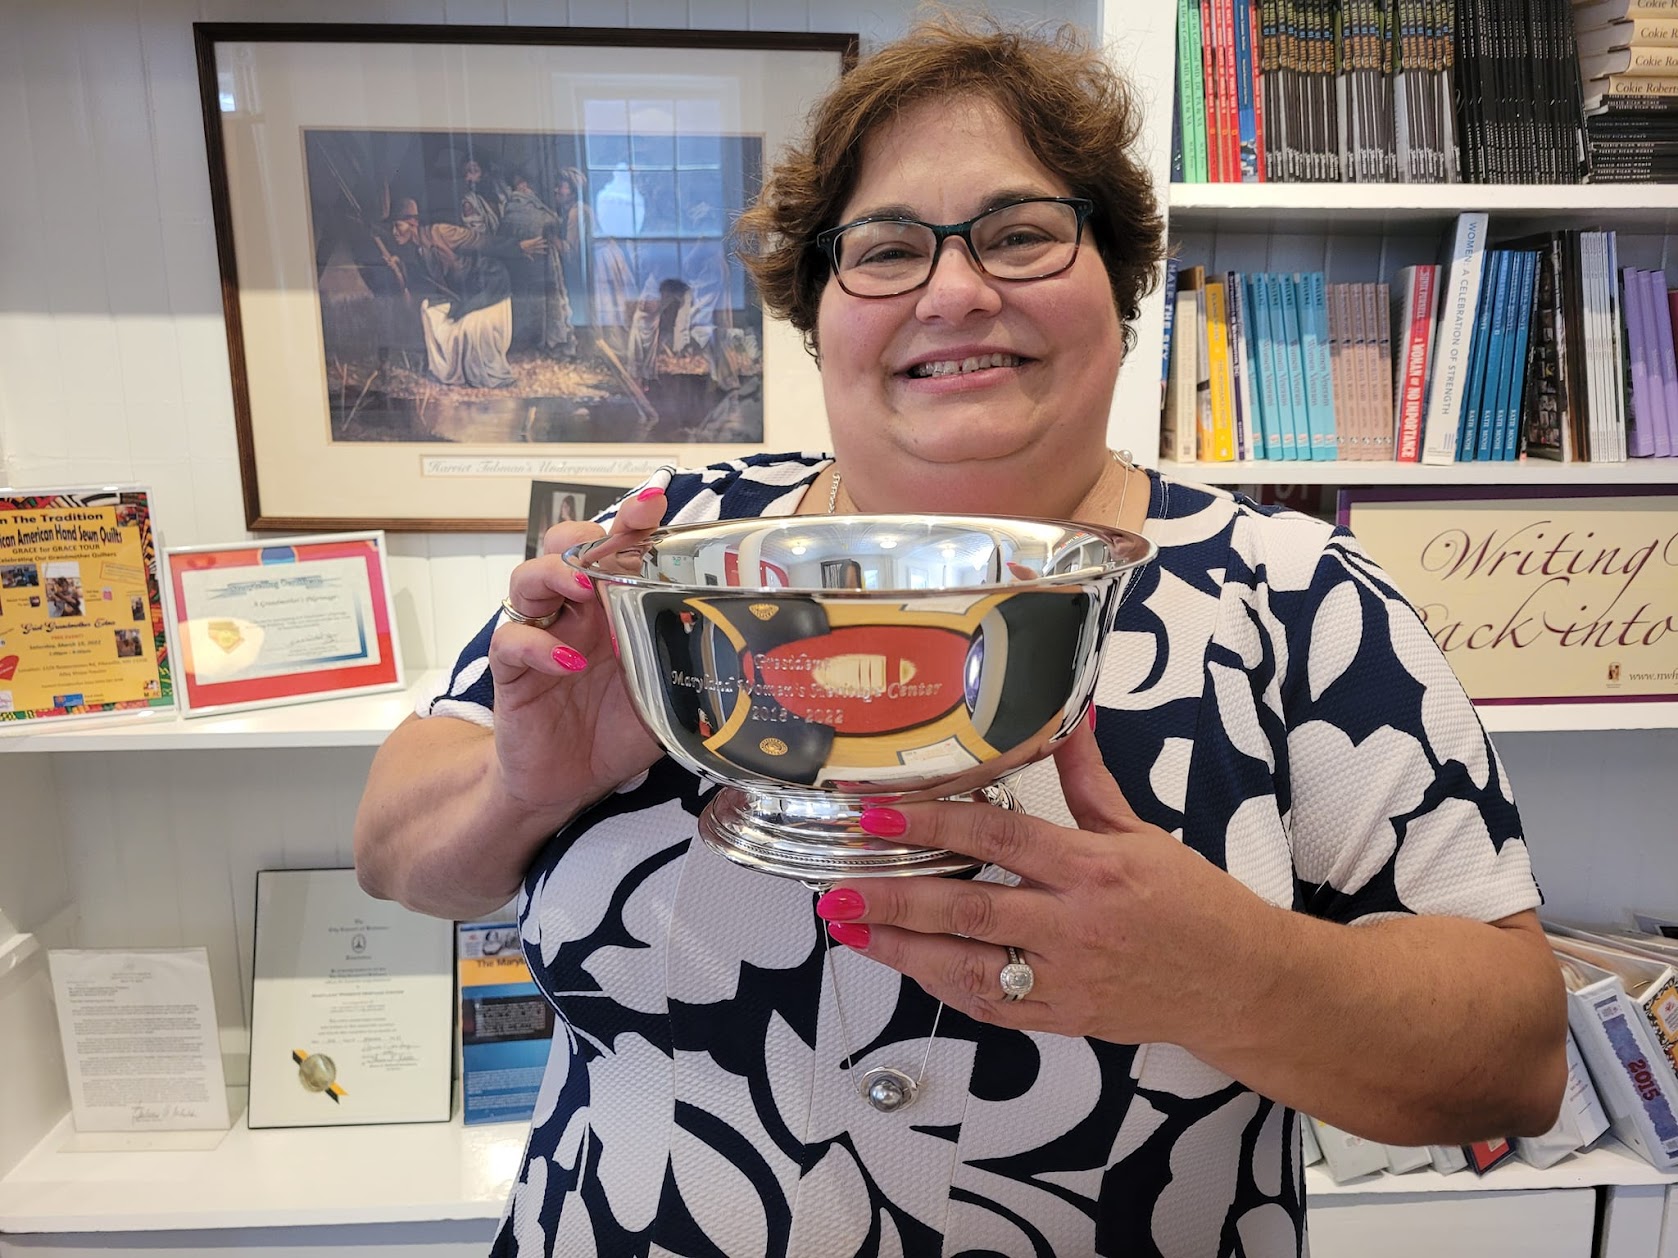 Maria Darby holding a silver bowl